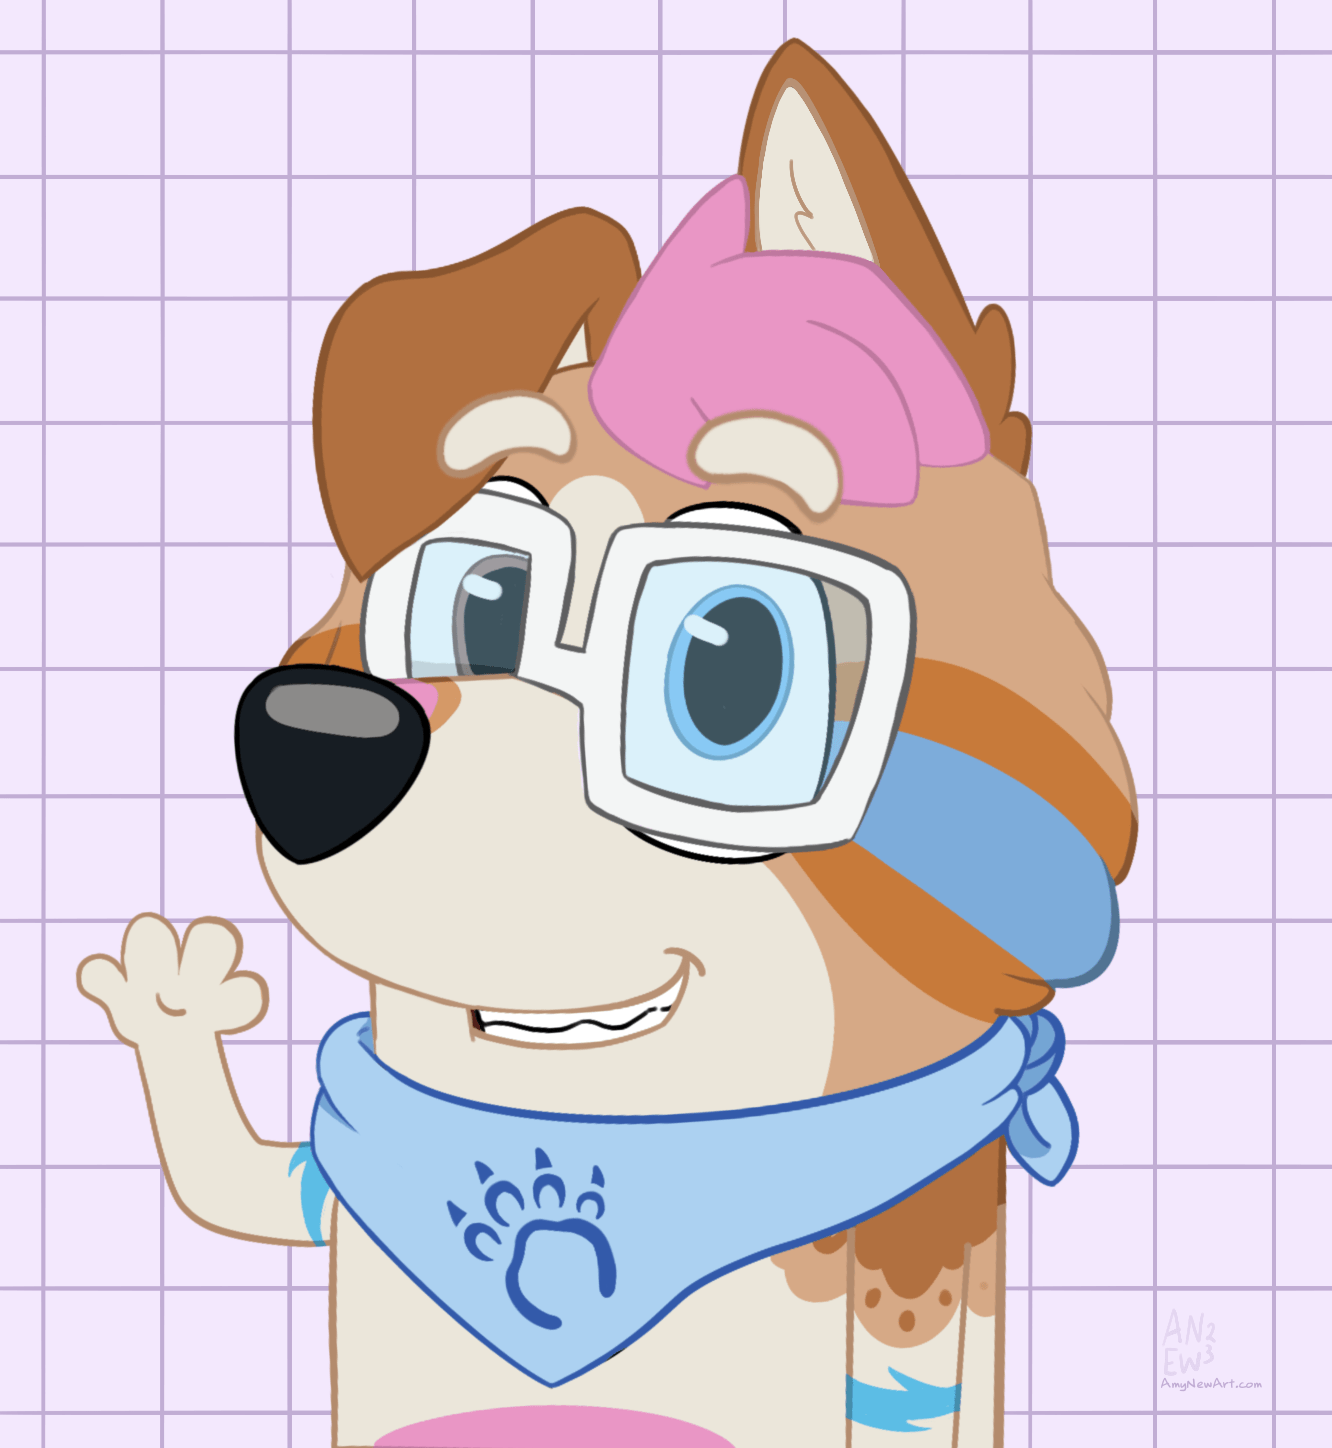 An icon of Bowie done in the style of the Bluey cartoon